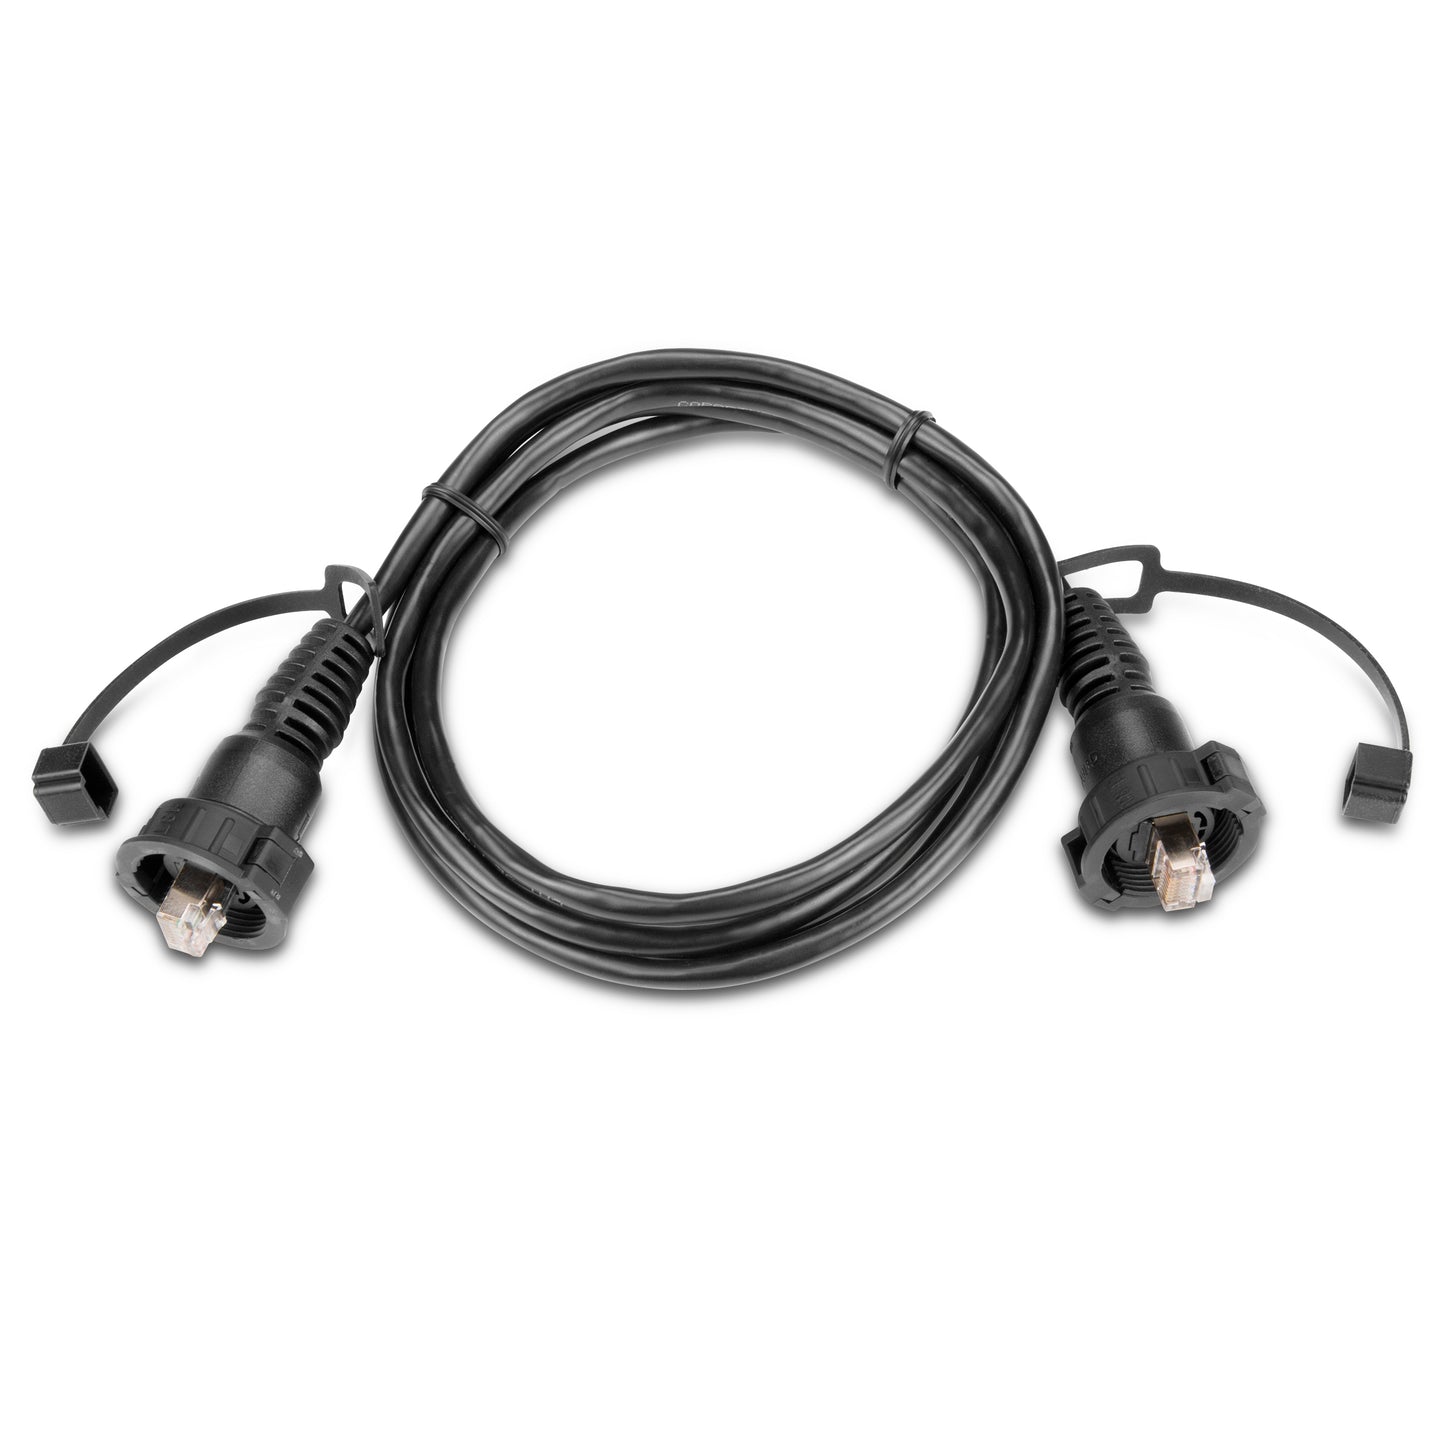 Marine Network Cables - KBM Outdoors